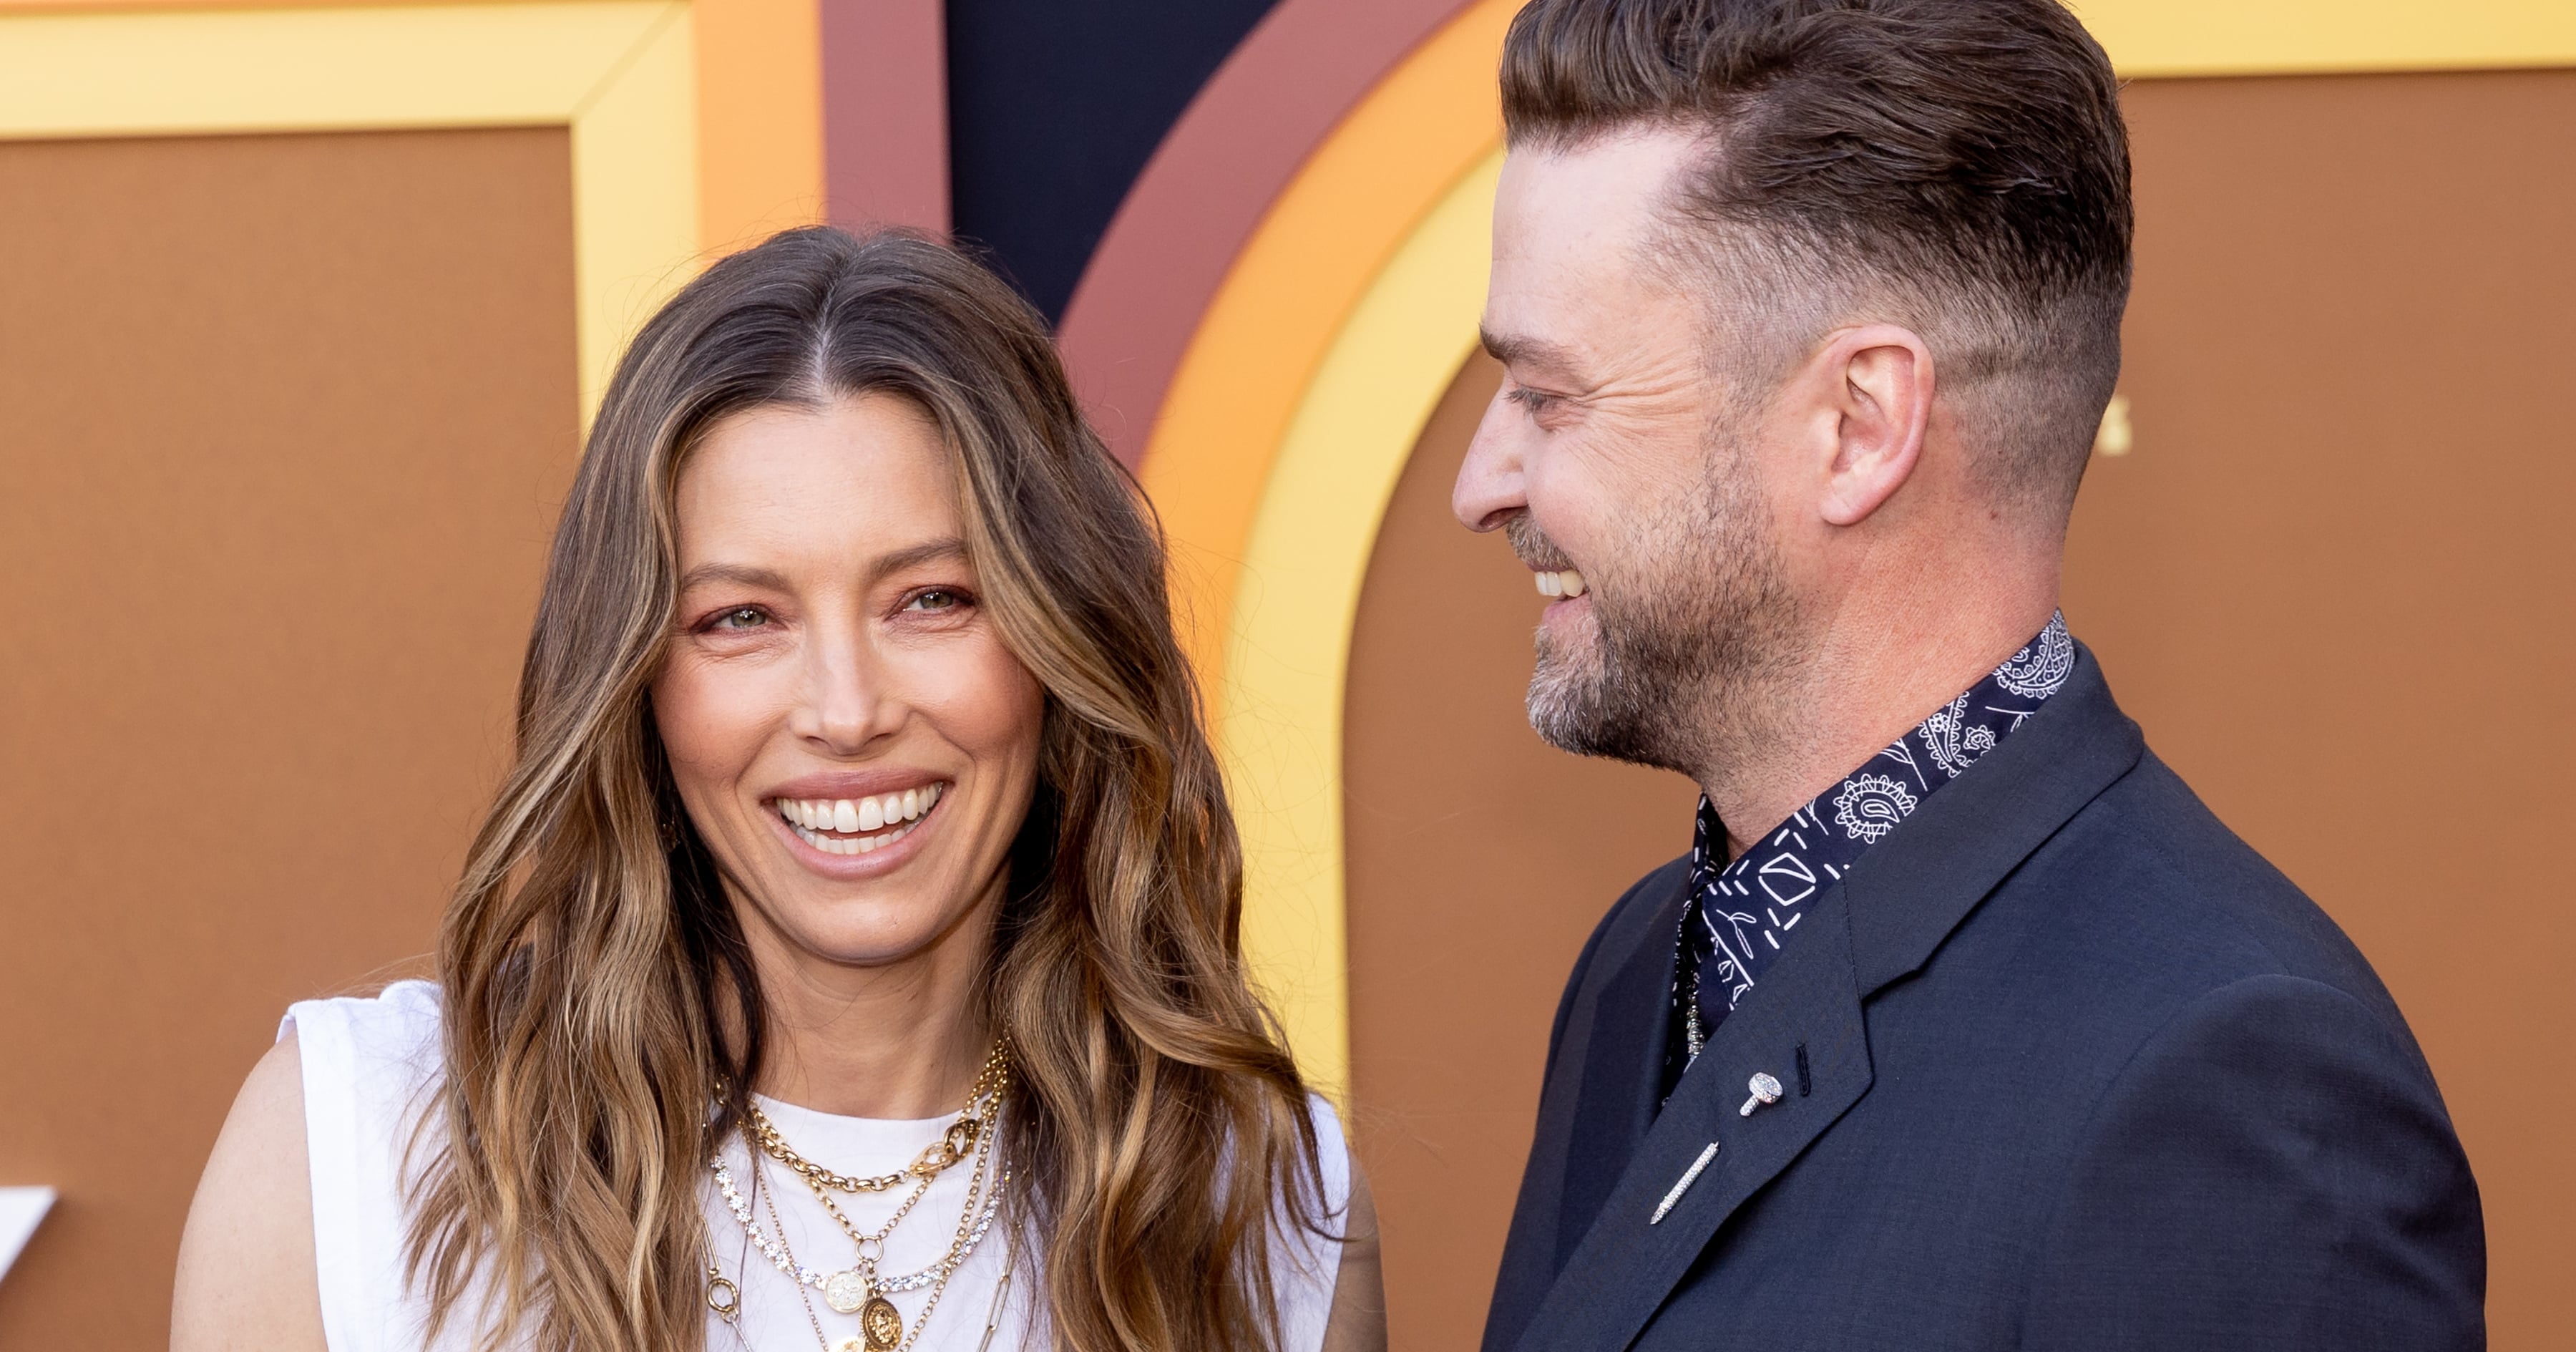 Jessica Biel Shows Off Her “Abs of Steel” With Help From Justin Timberlake